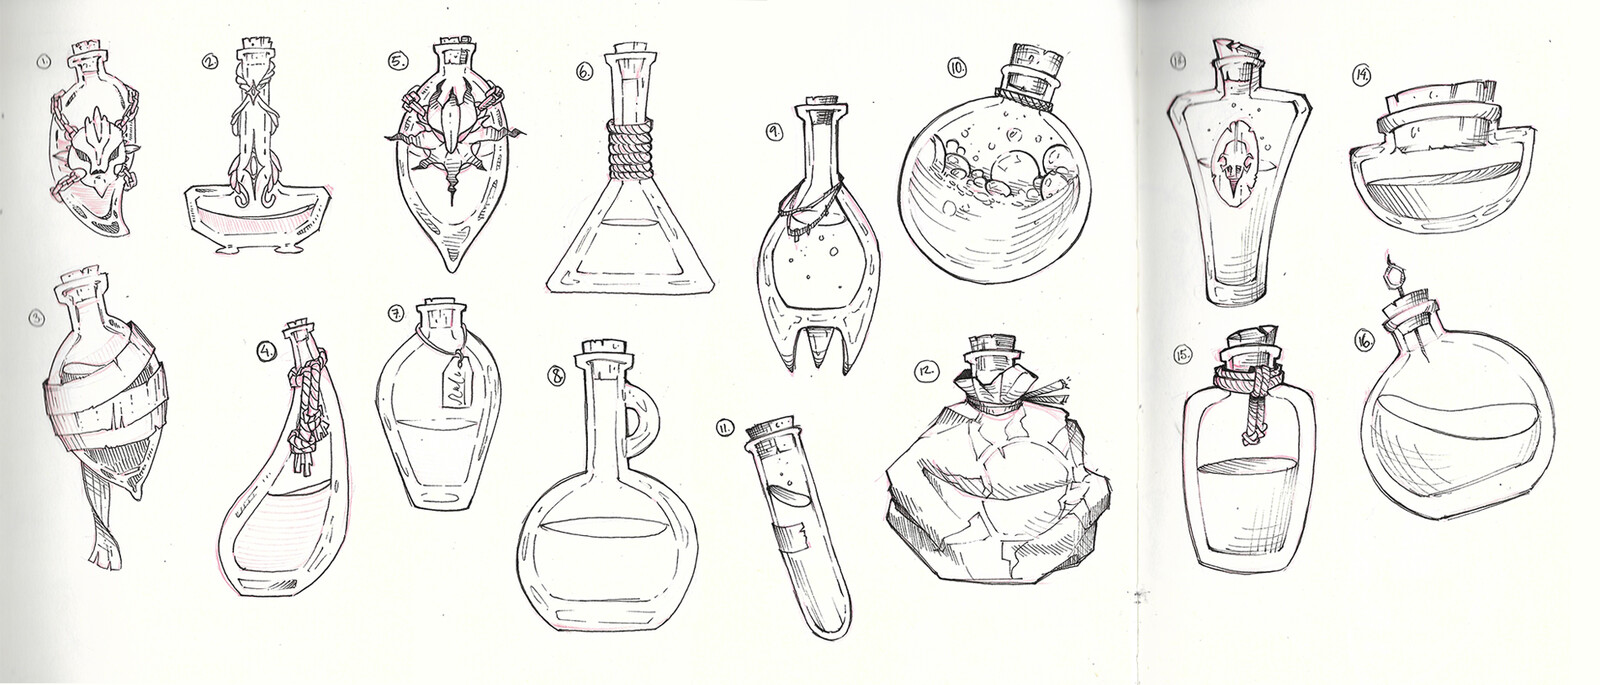 Sketches with pen on paper, trying to come up with fun shapes and decorations for the potion bottles.